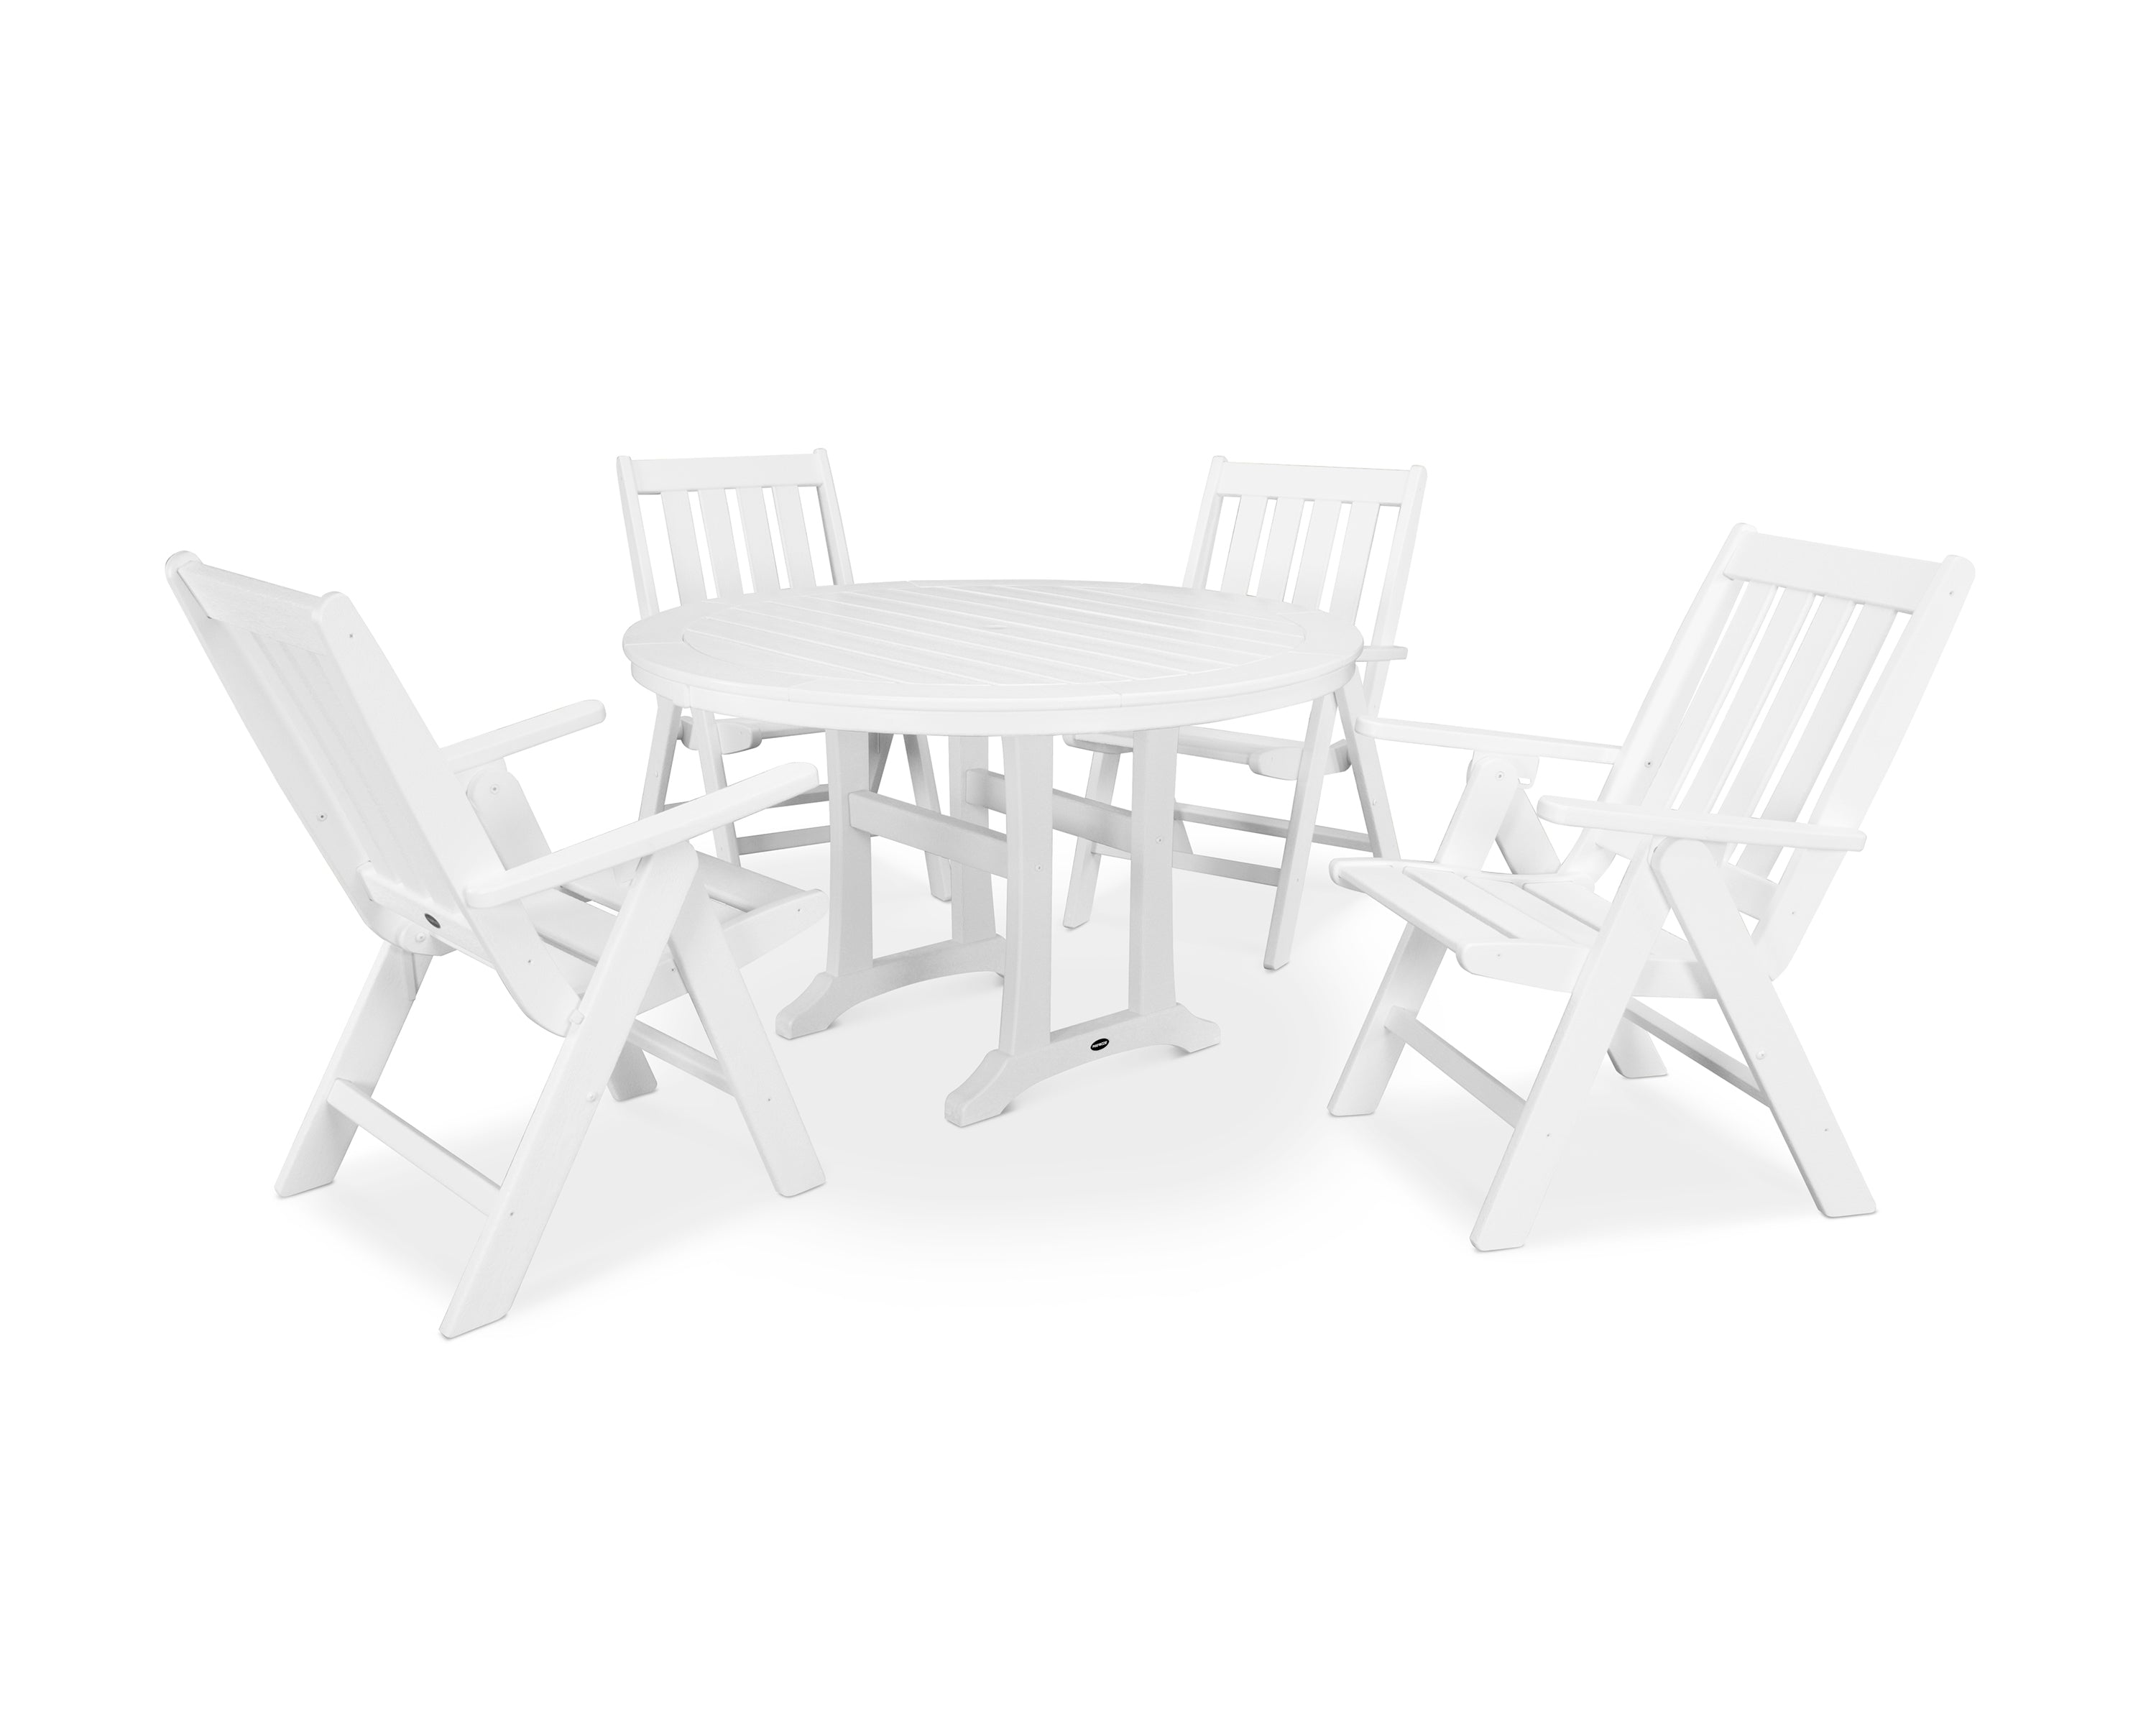 POLYWOOD® Vineyard Folding Chair 5-Piece Round Dining Set with Trestle Legs in White